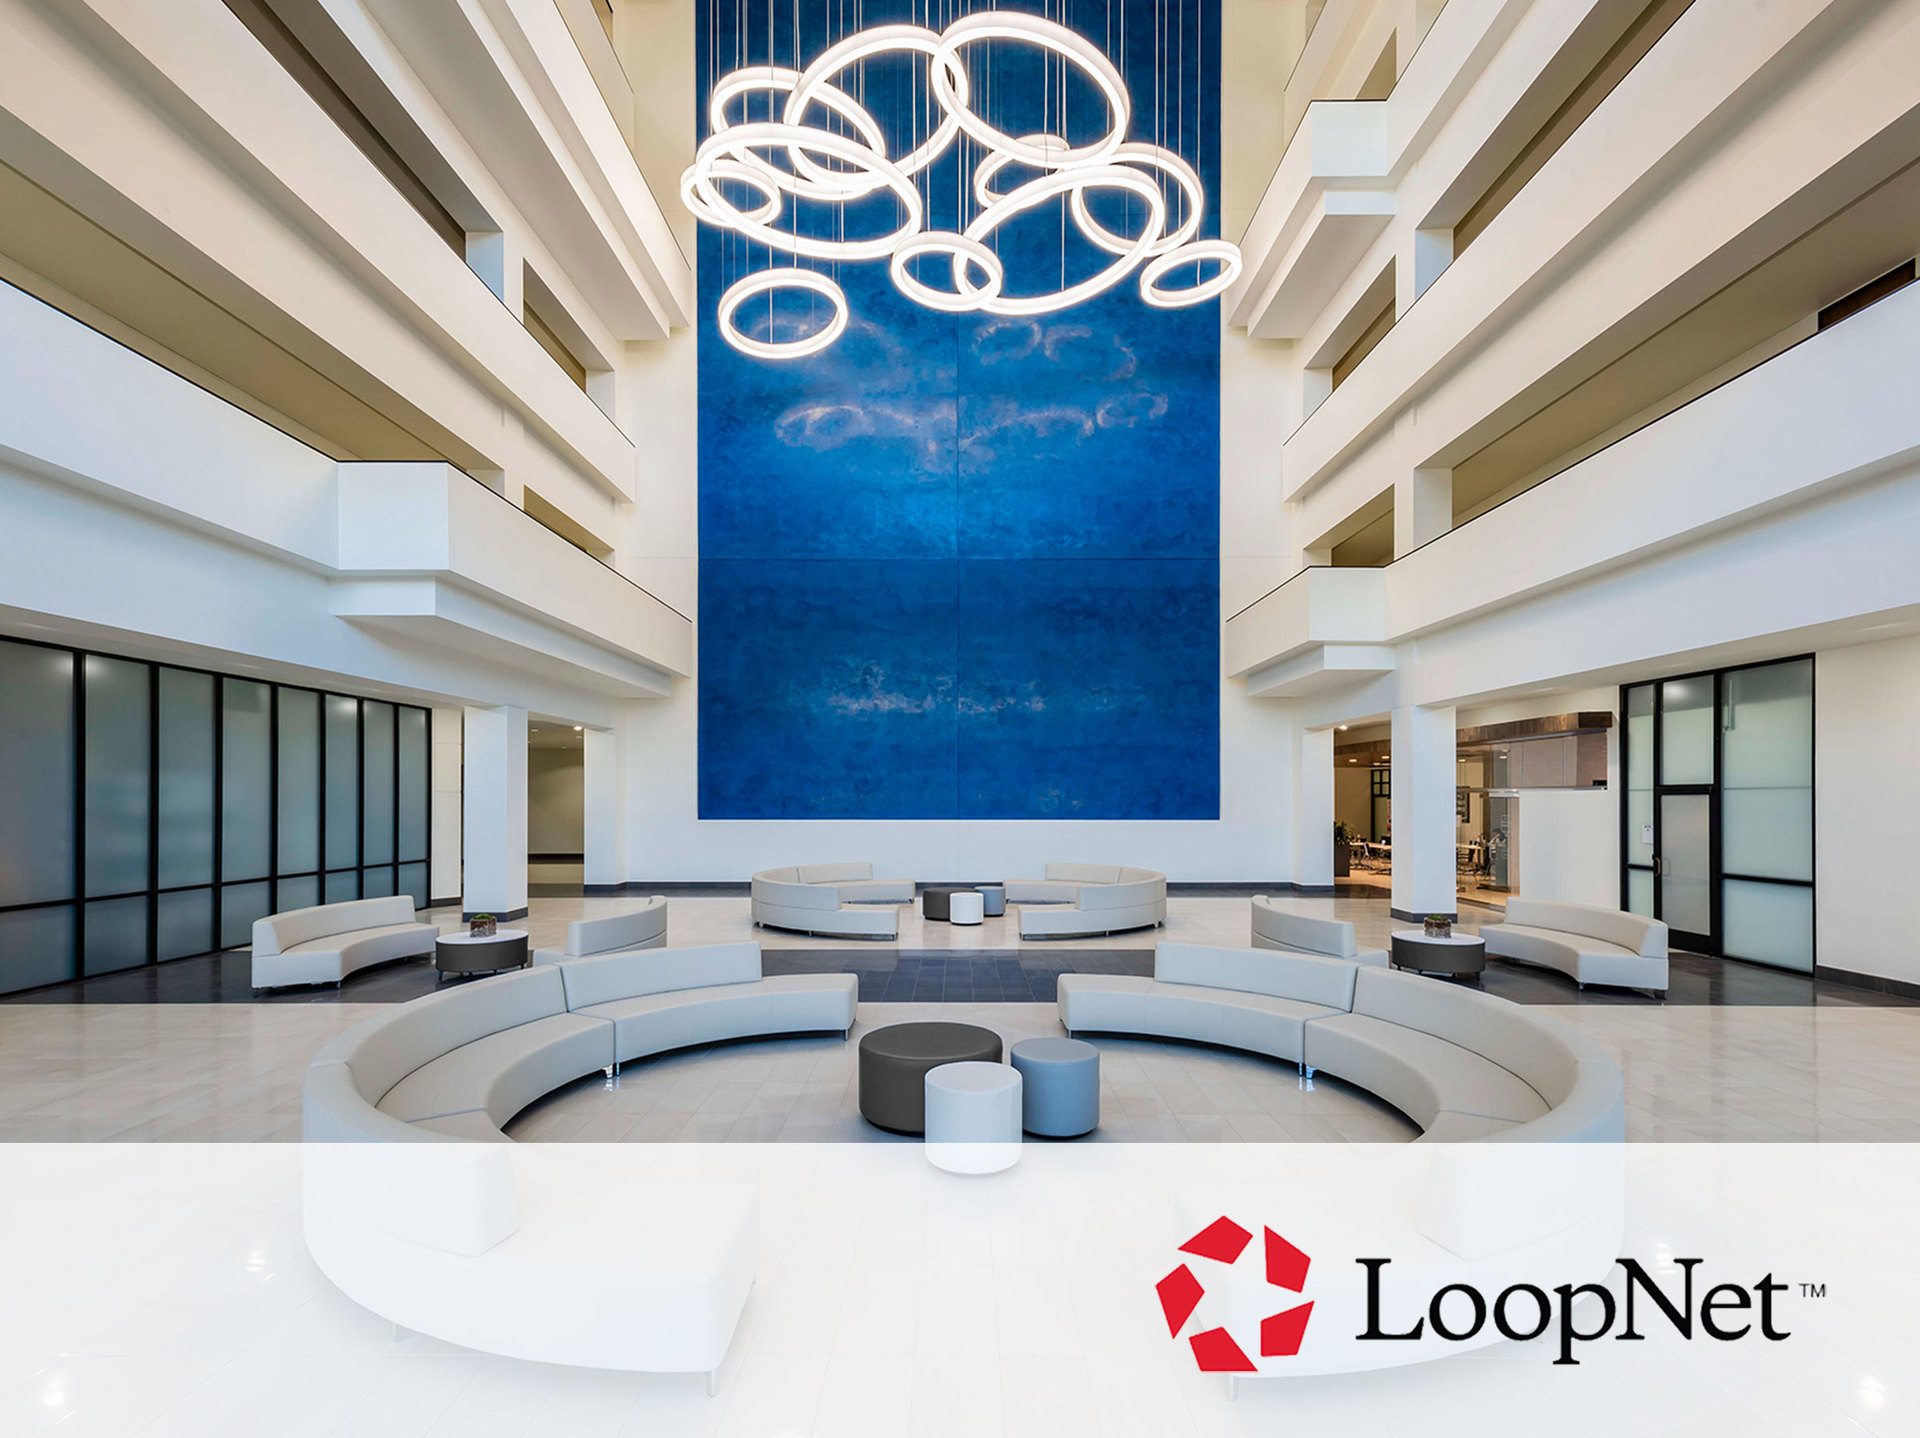 These Commercial Lobby Features Attract and Retain Tenants